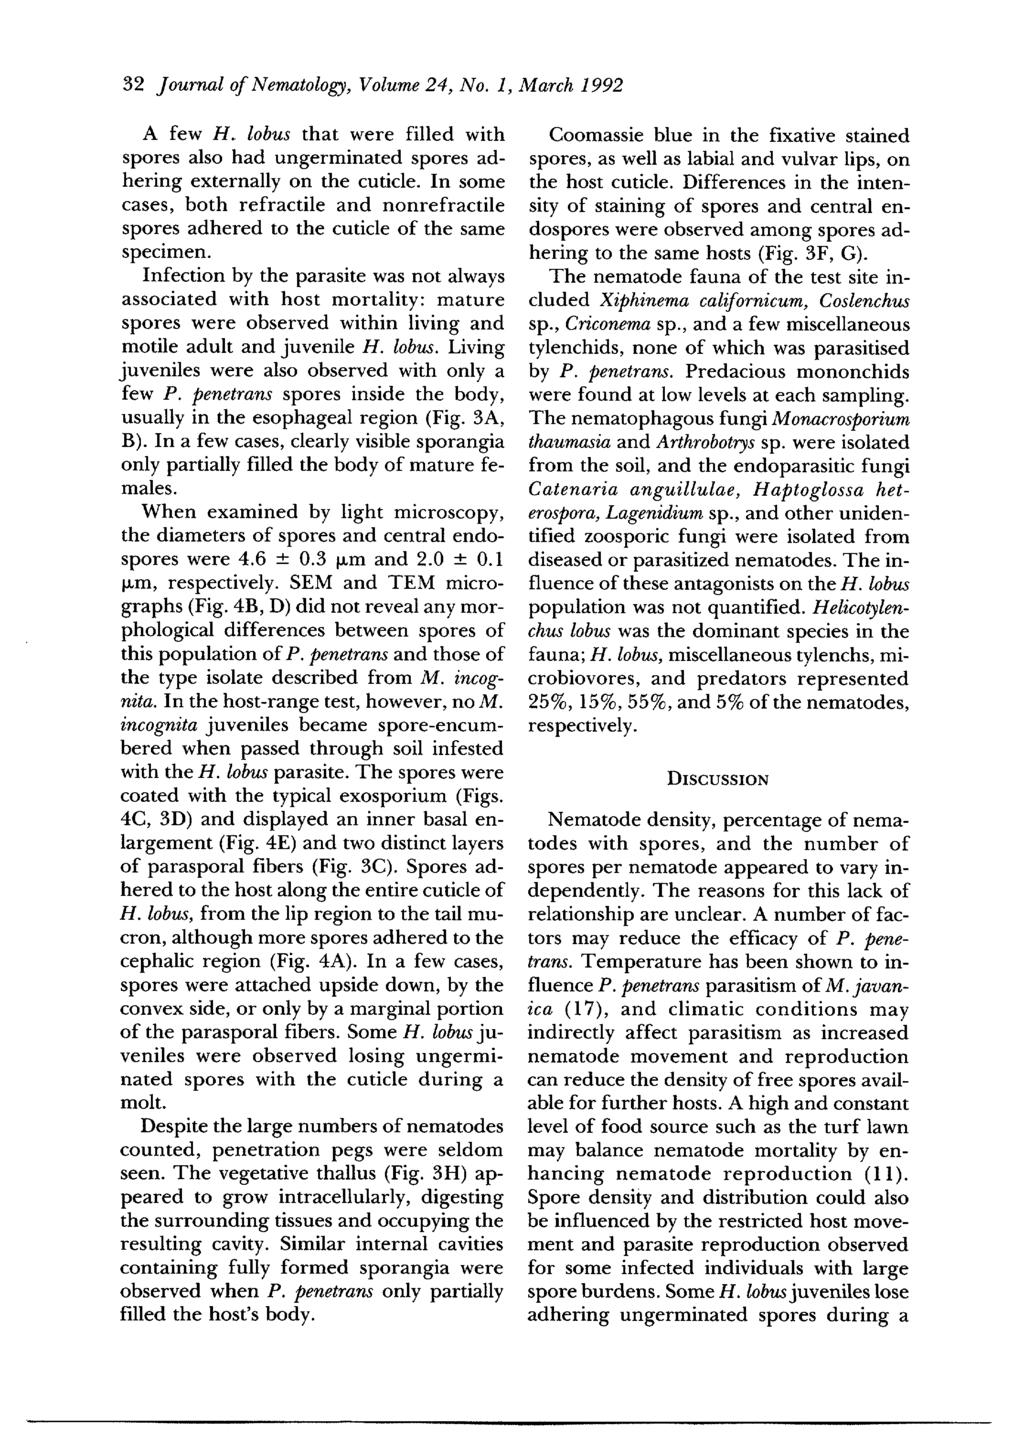 32 Journal of Nematology, Volume 24, No. 1, March 1992 A few H. lobus that were filled with spores also had ungerminated spores adhering externally on the cuticle.